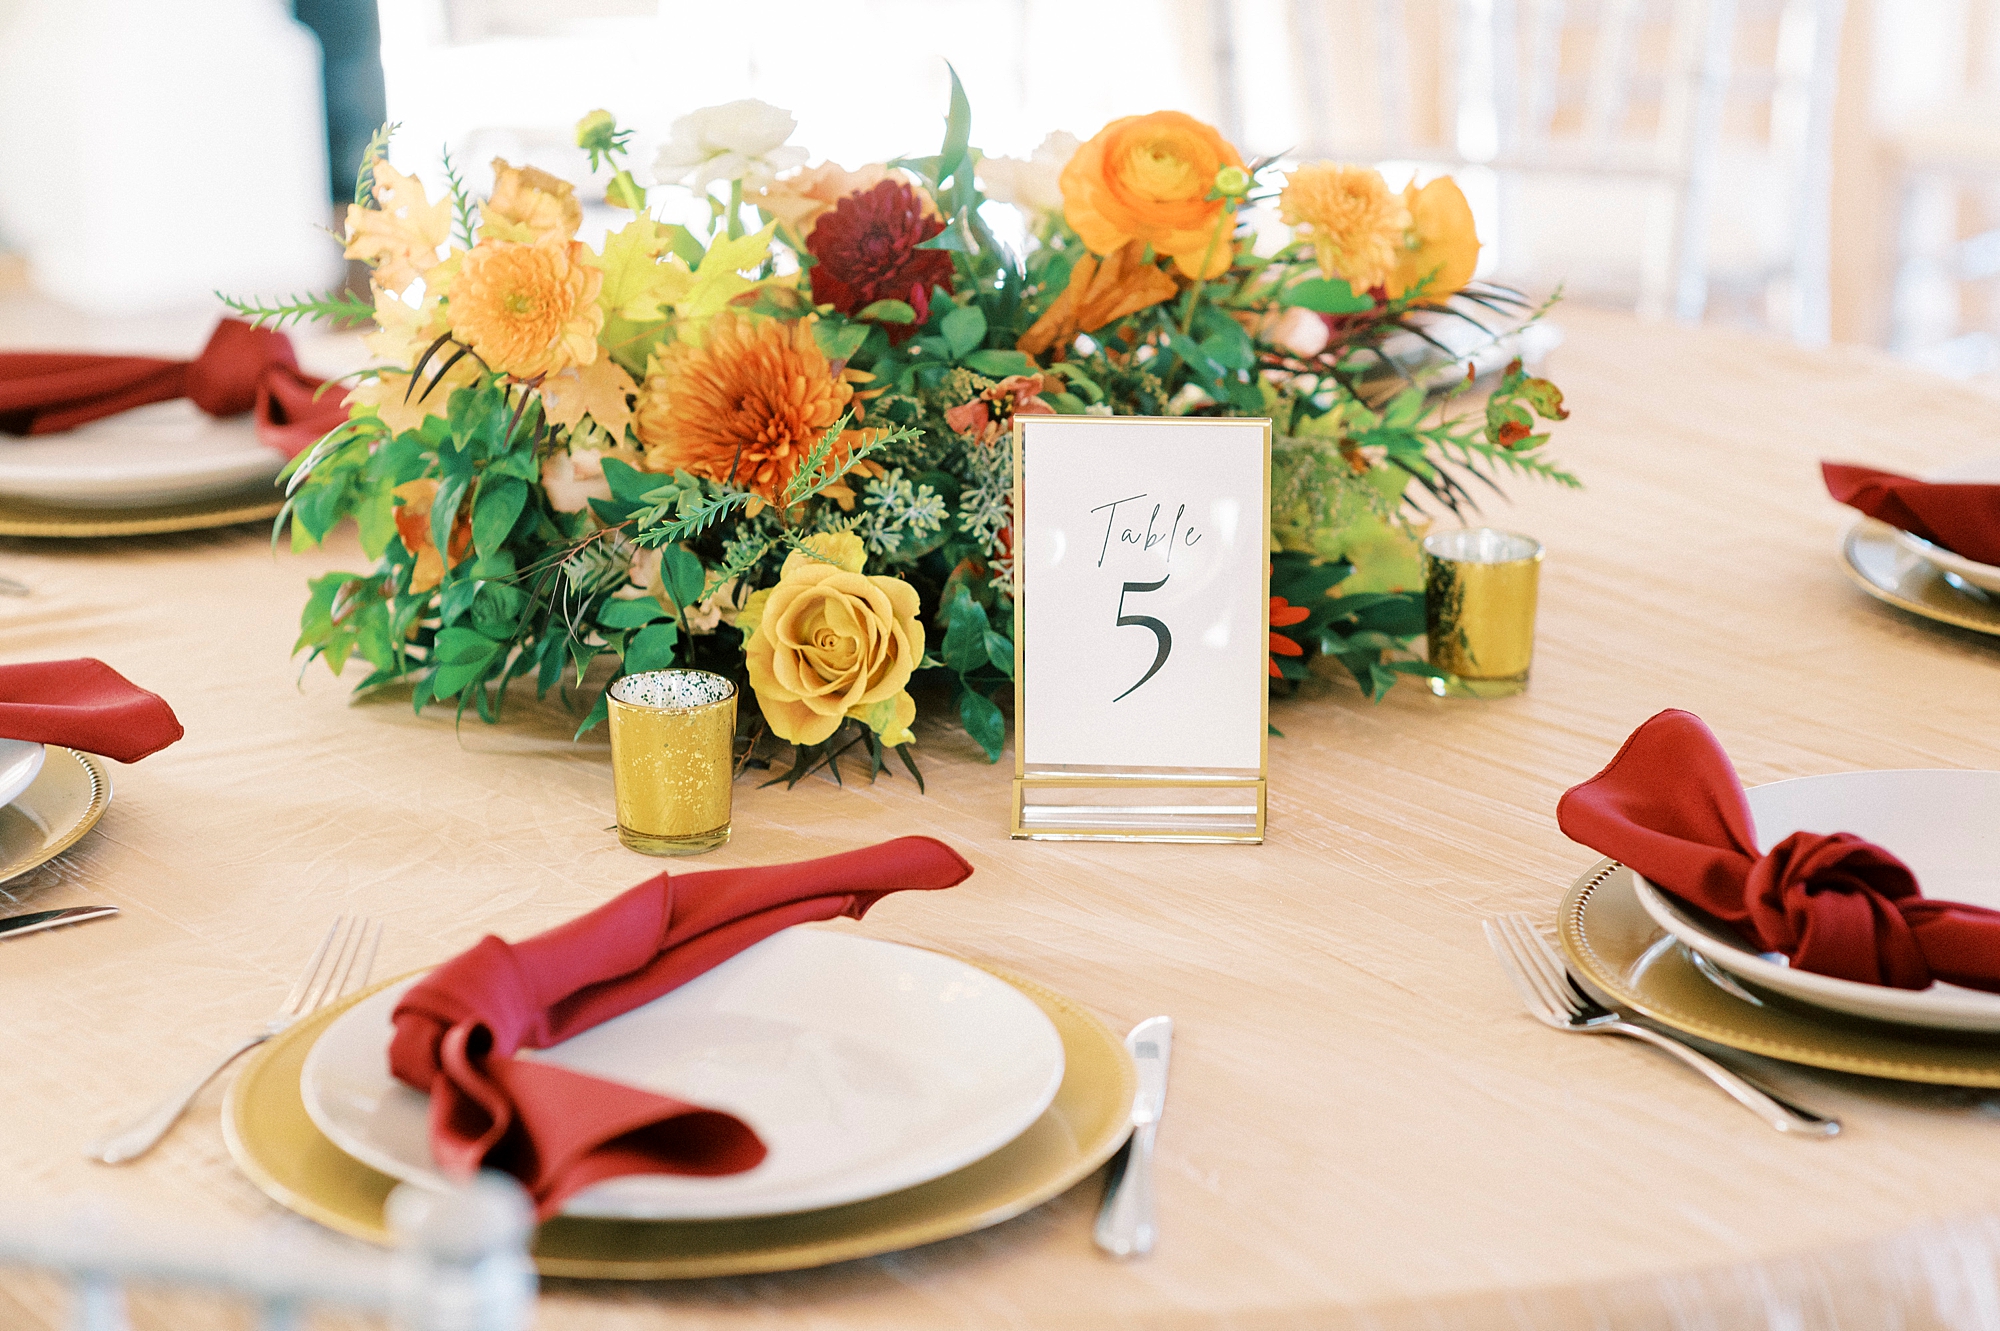 place setting with gold plates, burgundy napkins, and yellow and orange flowers